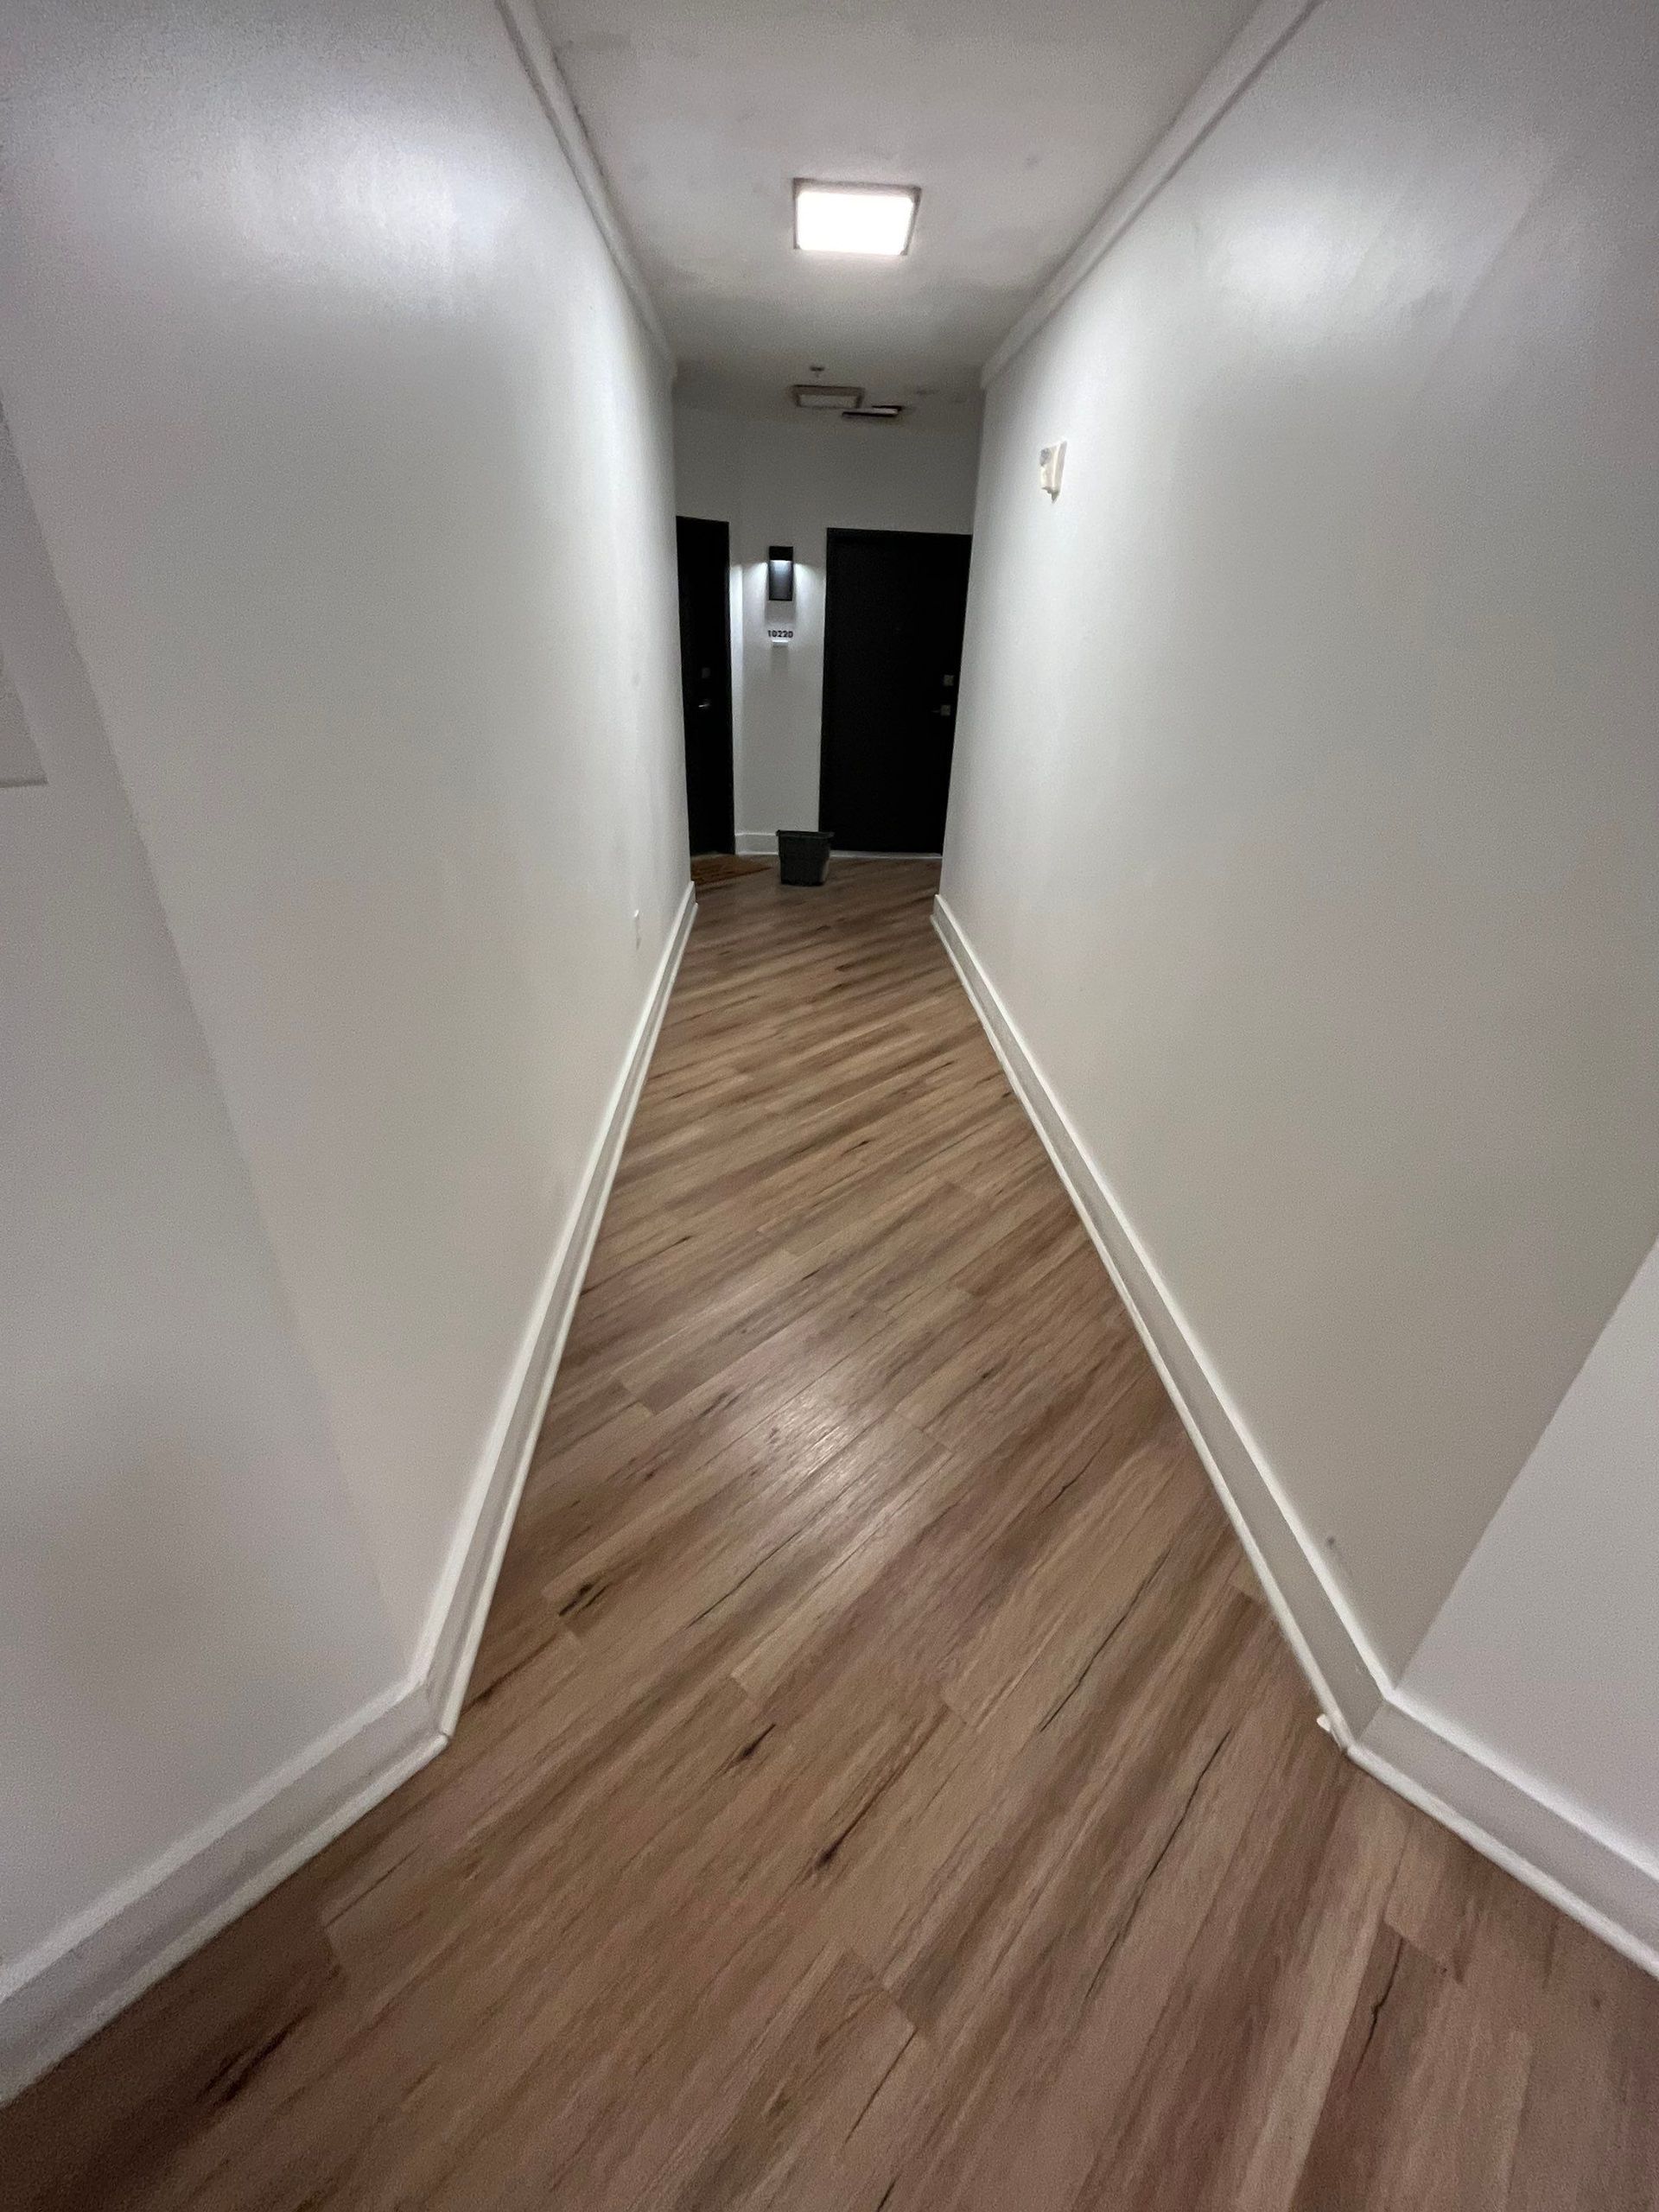 a long hallway with wooden floors and white walls .